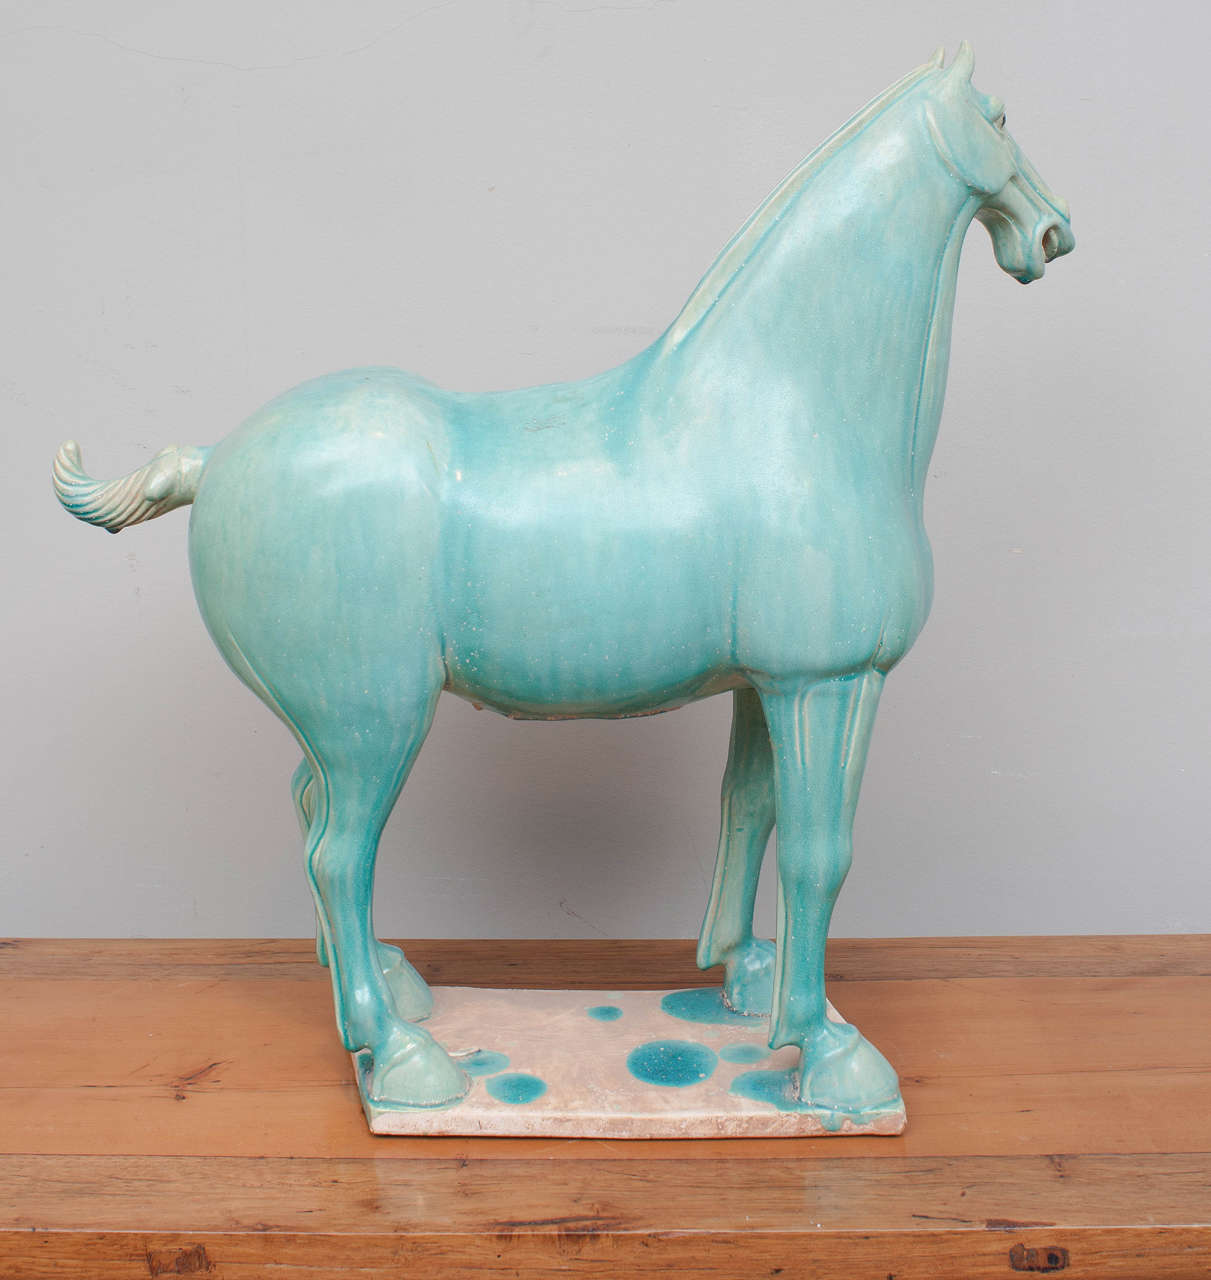 Reminiscent of Tang Dynasty artifacts, this expertly green glazed ceramic horse will enhance any interior.